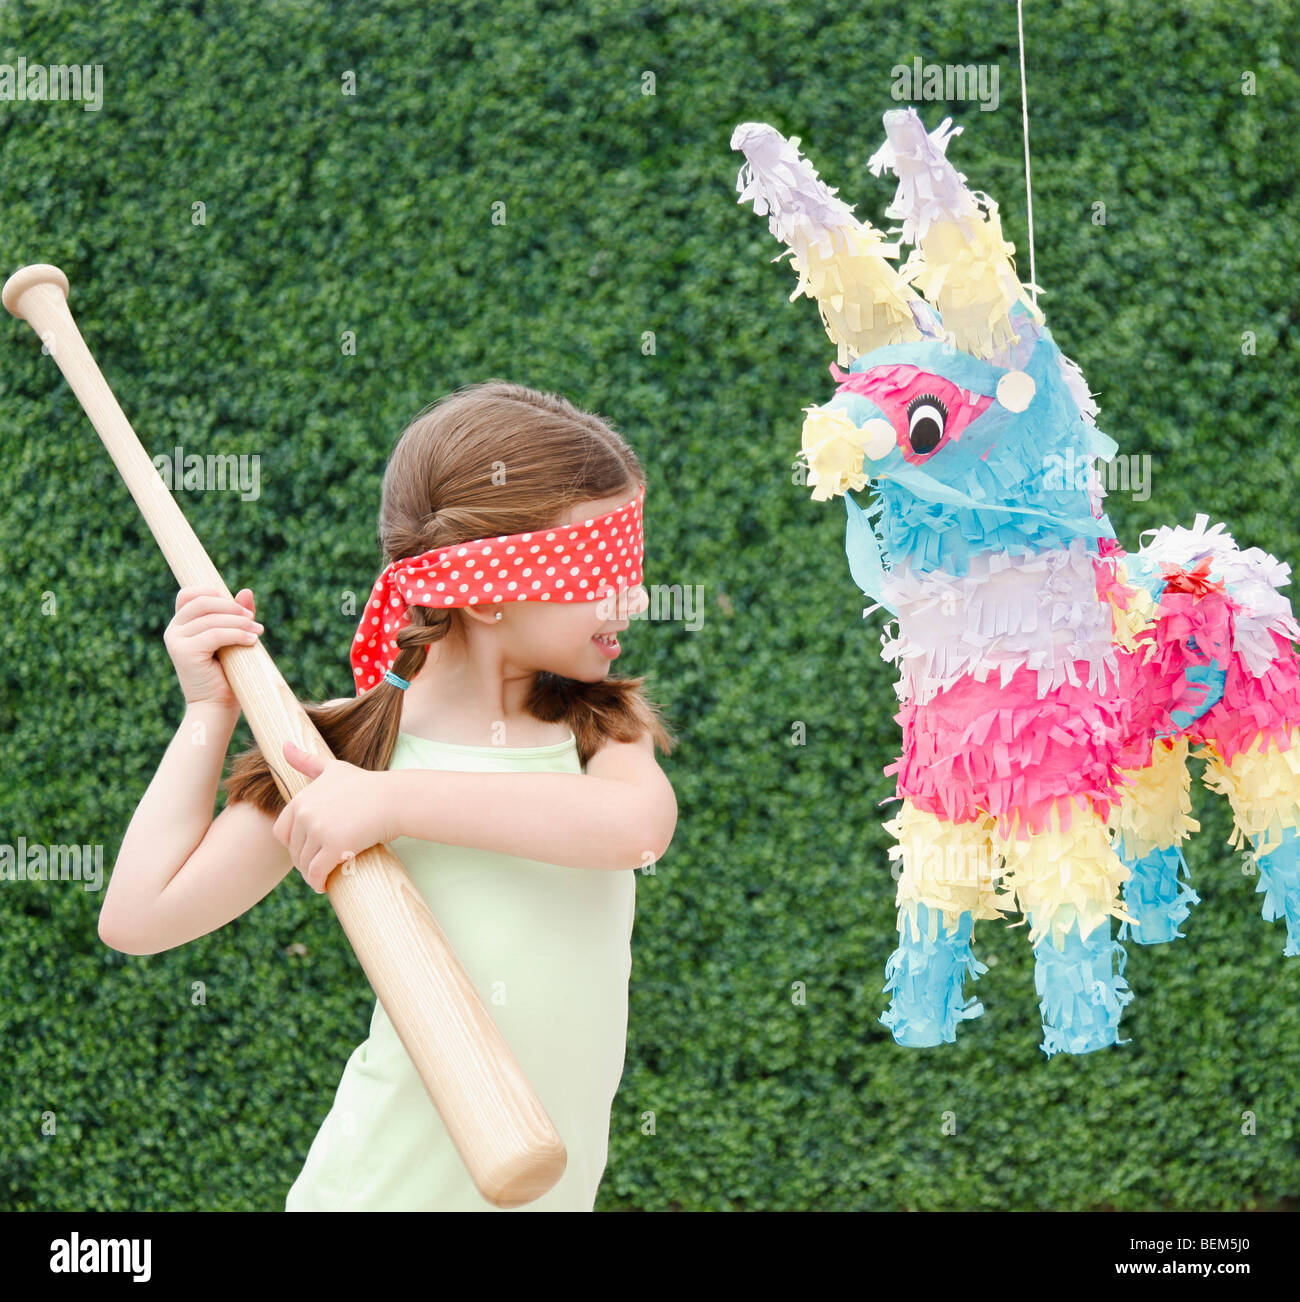 Spanish Pinata High Resolution Stock Photography and Images - Alamy